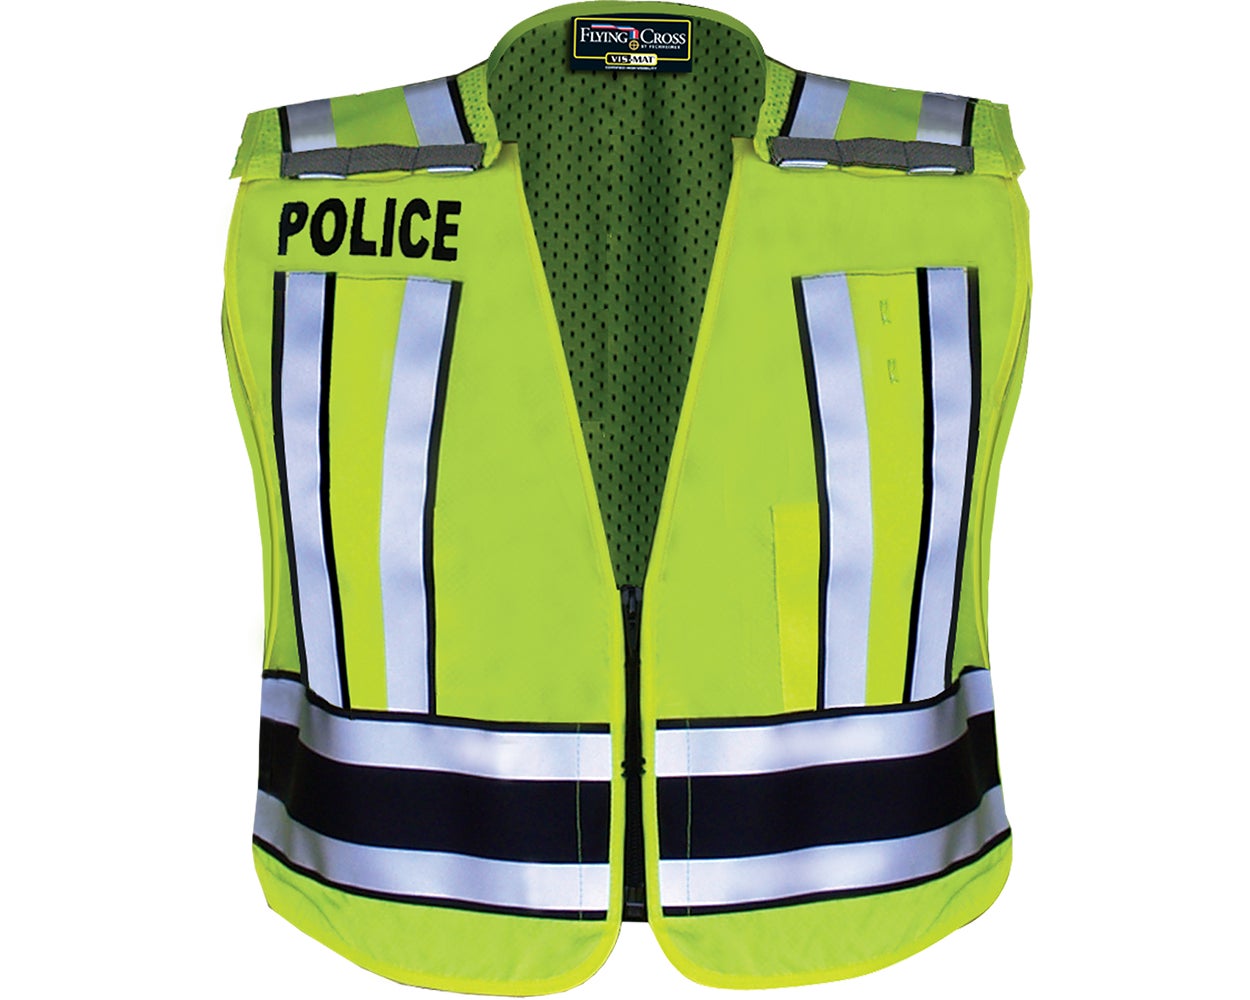 Flying Cross HIVIS YELLOW PRO SERIES SAFETY VEST WITH NAVY BAND AND POLICE LETTERING